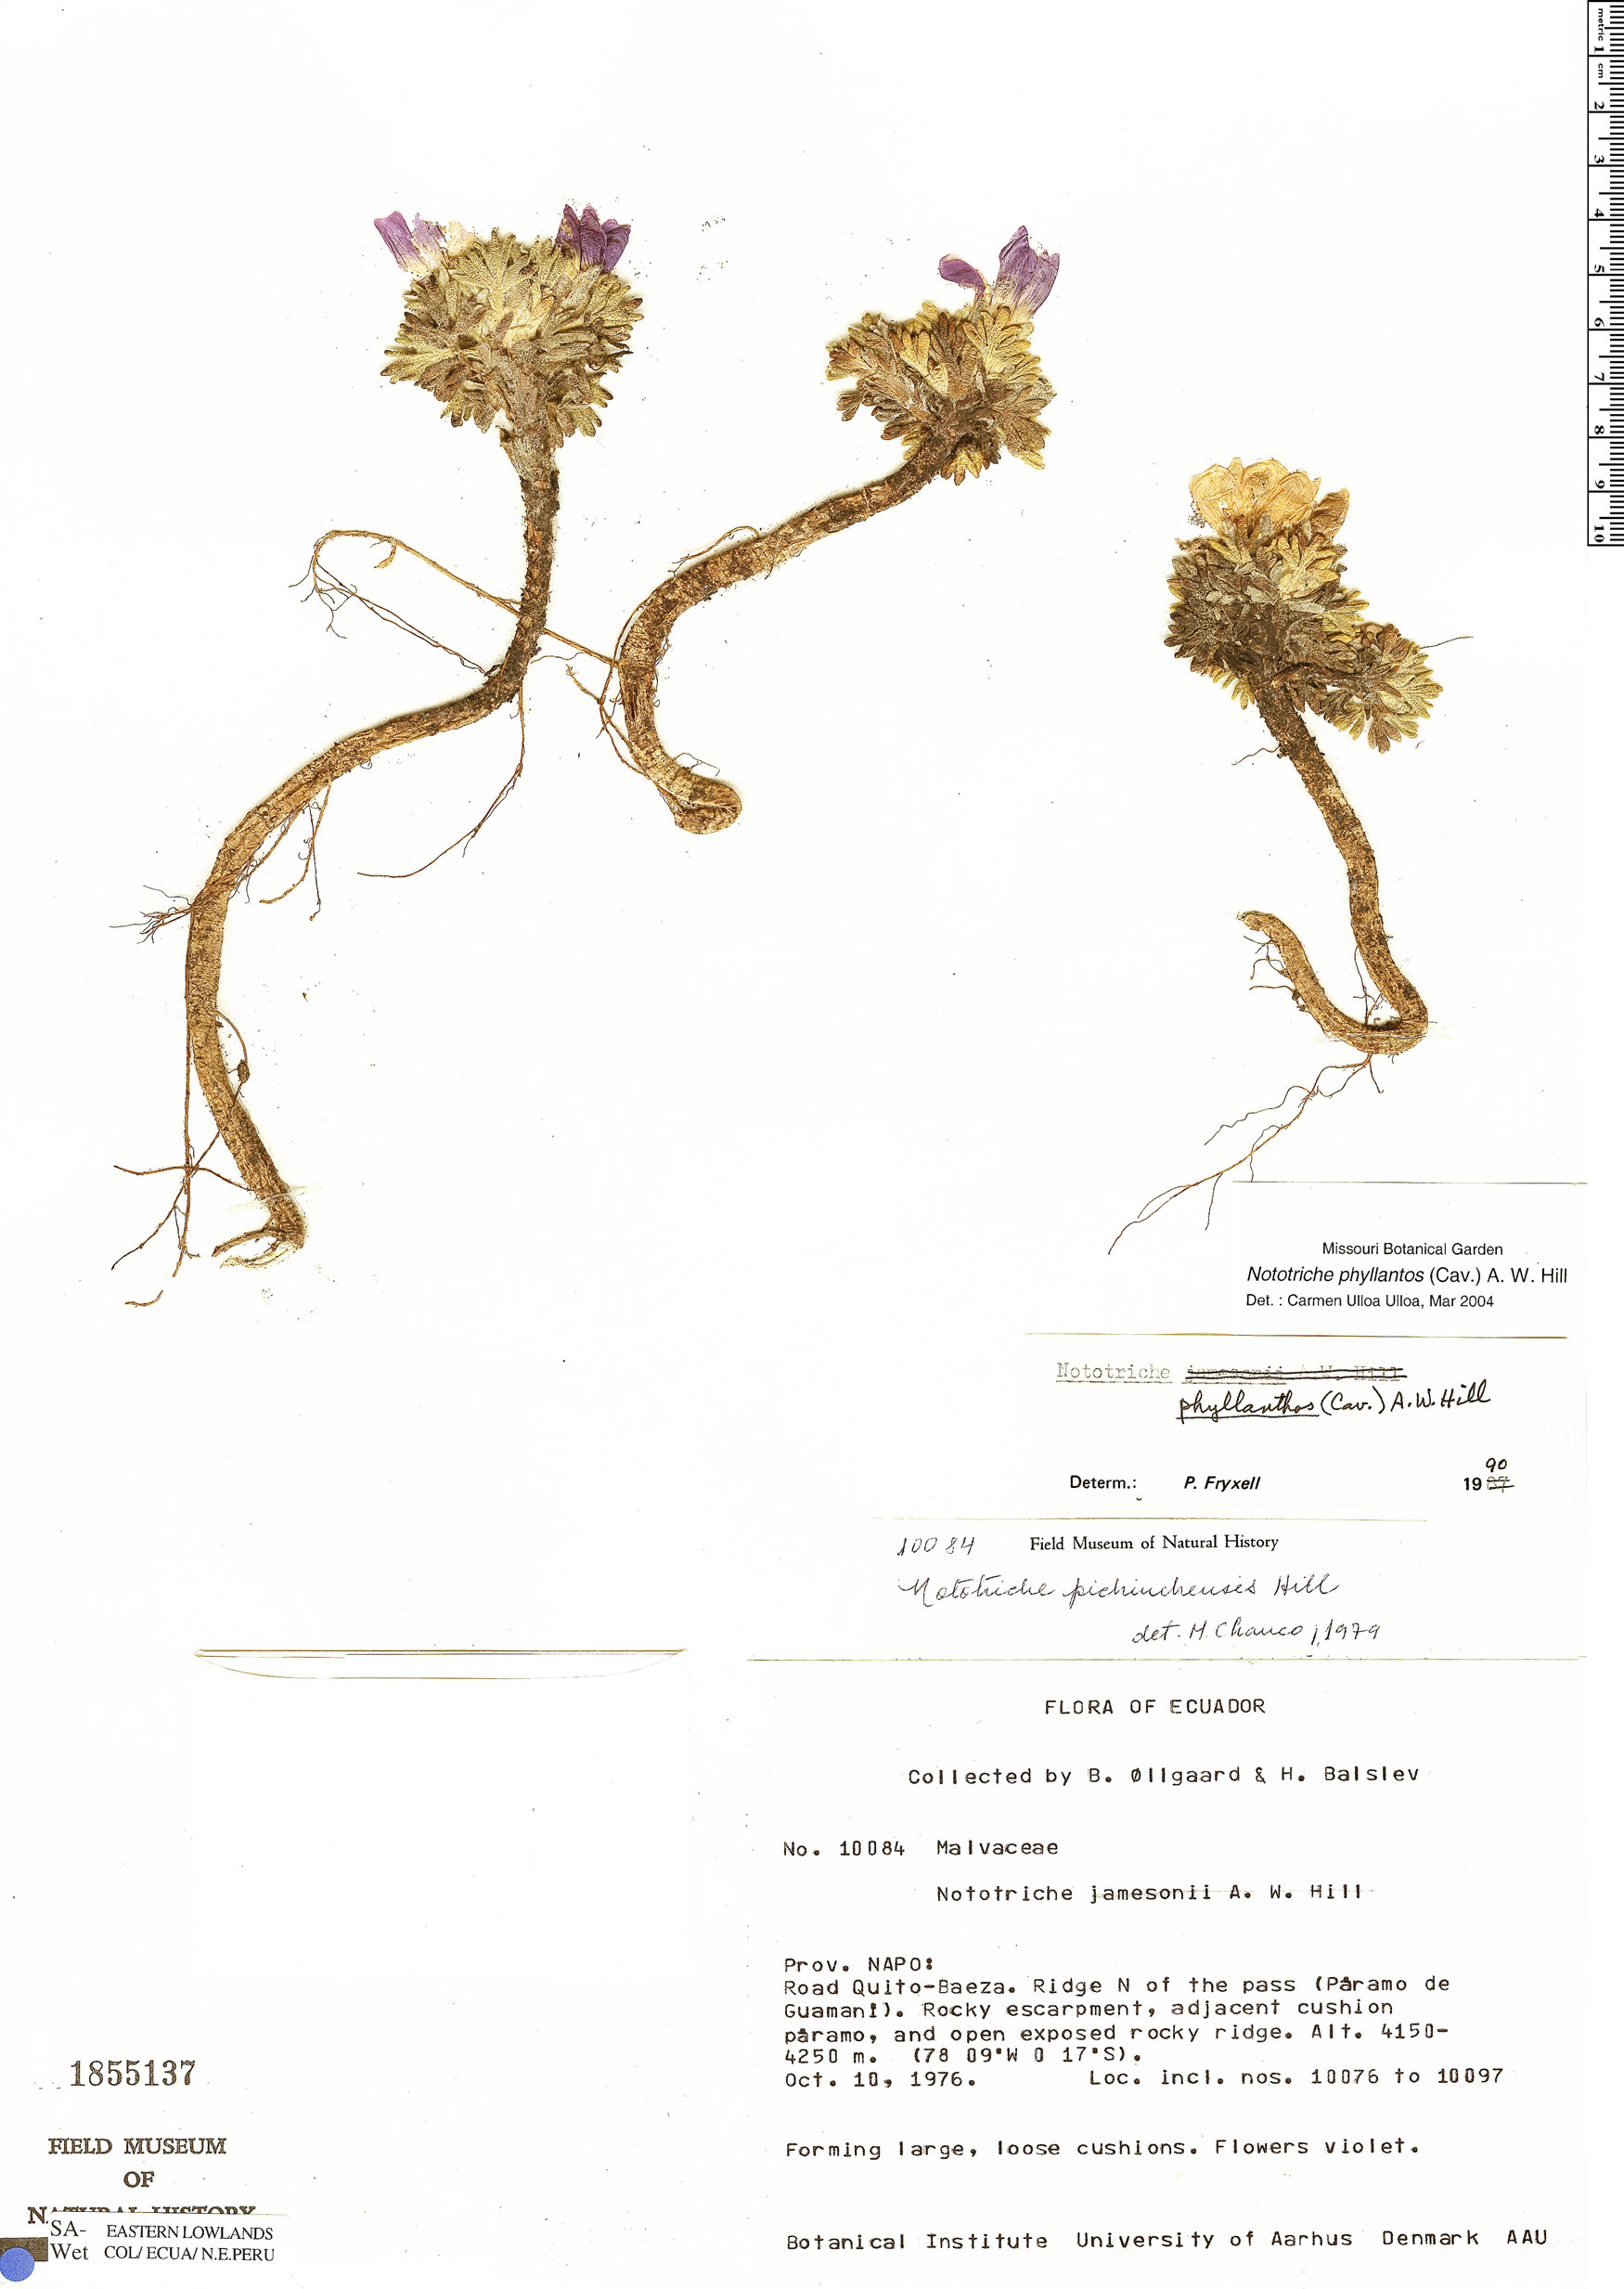 Nototriche phyllanthos image